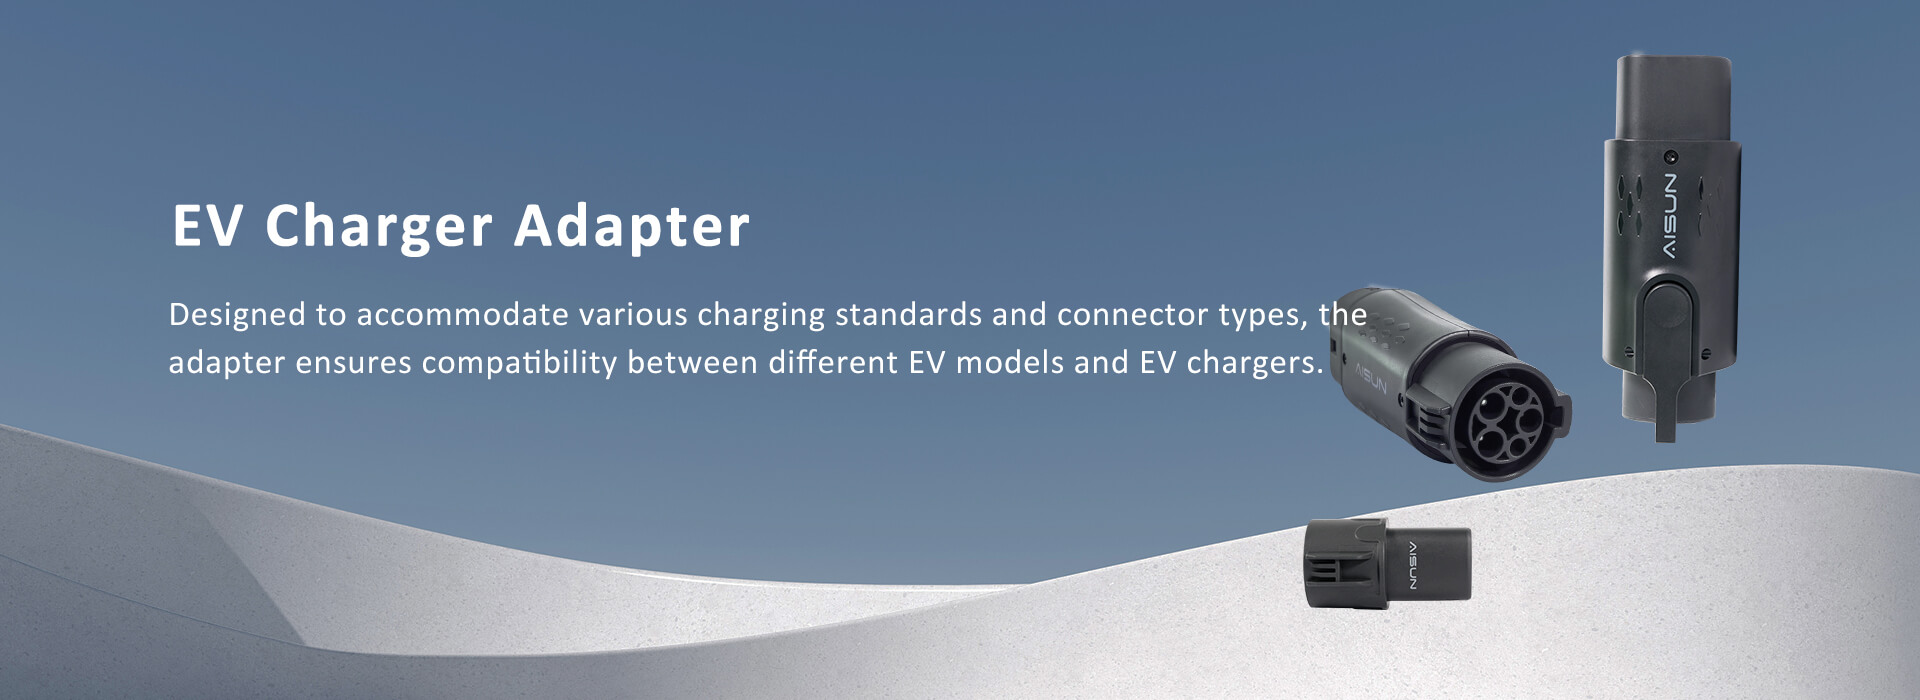 EV Charger Adapter